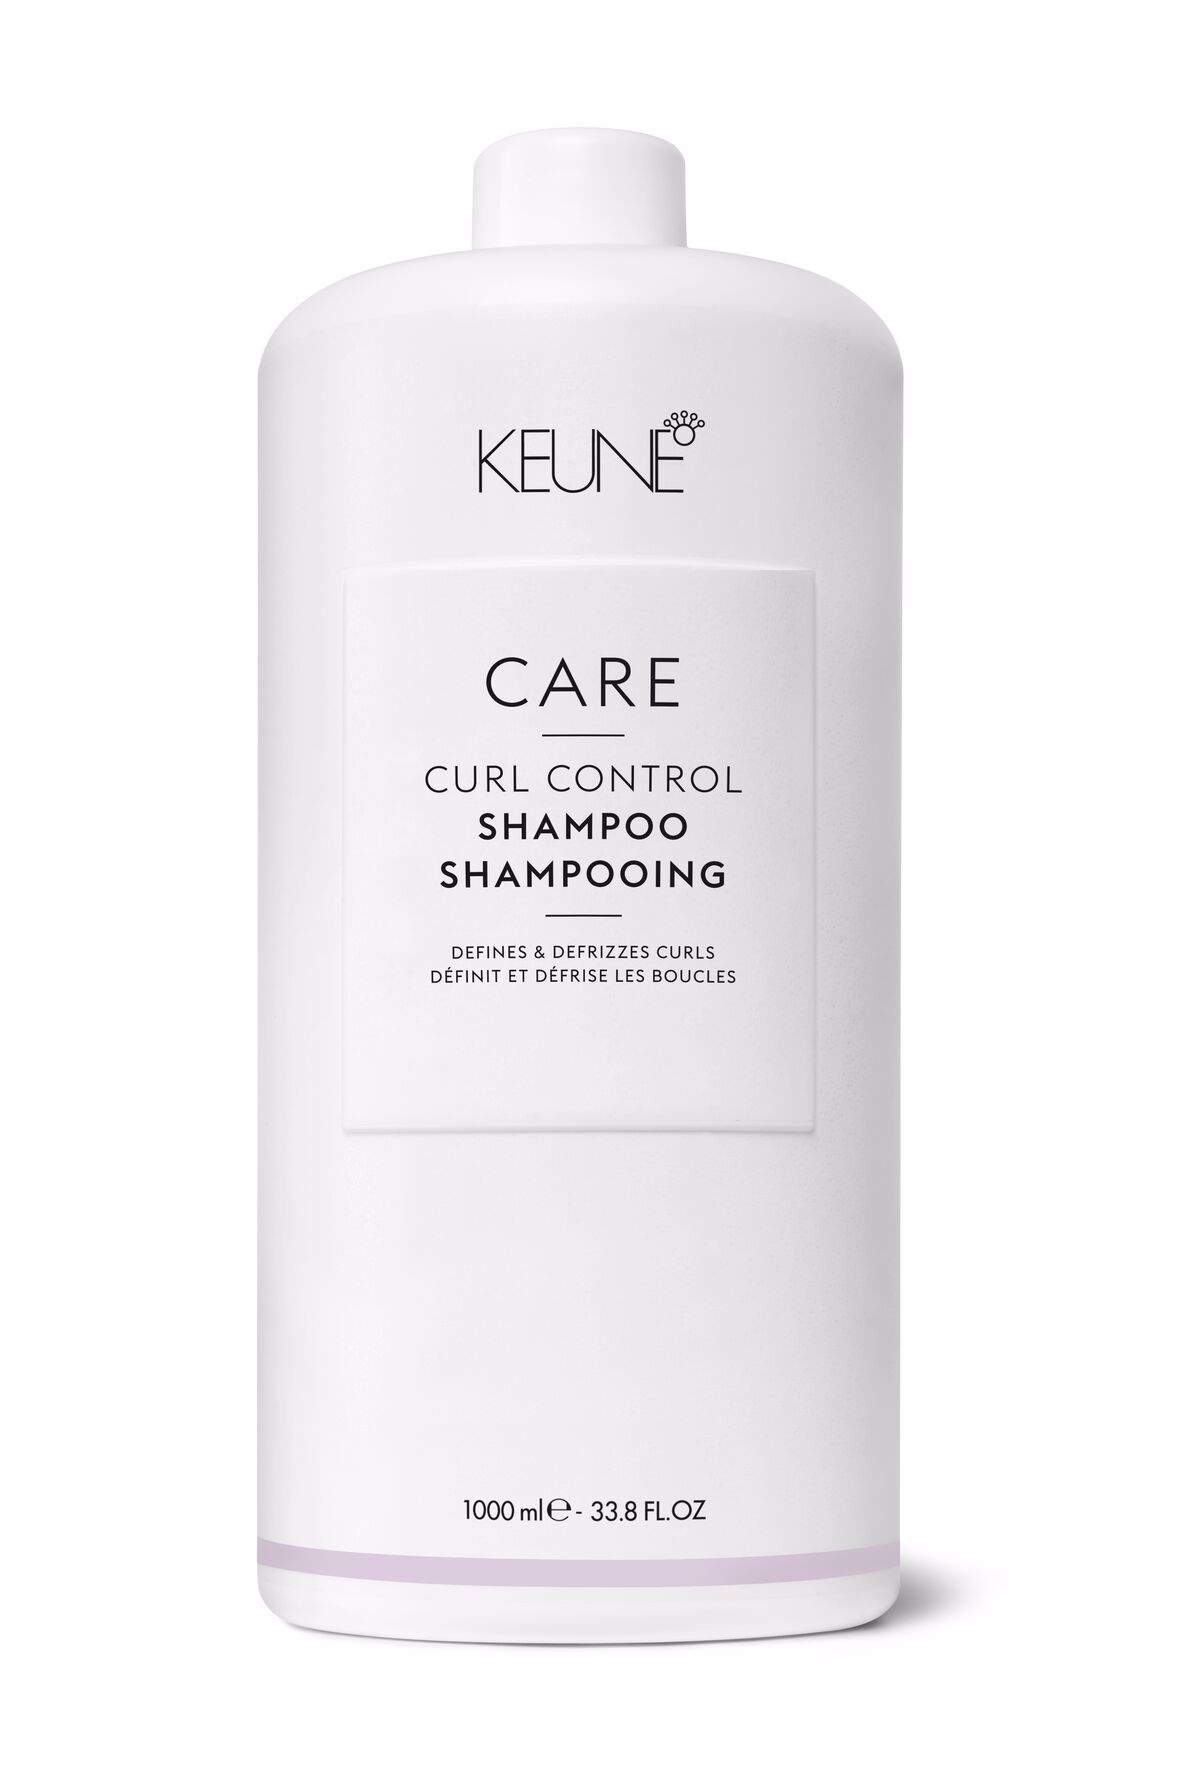 Explore the best shampoo for curly hair. Our CARE Curl Control Shampoo is specially designed for curl hair. Get your curly hair shampoo now on keune.ch!